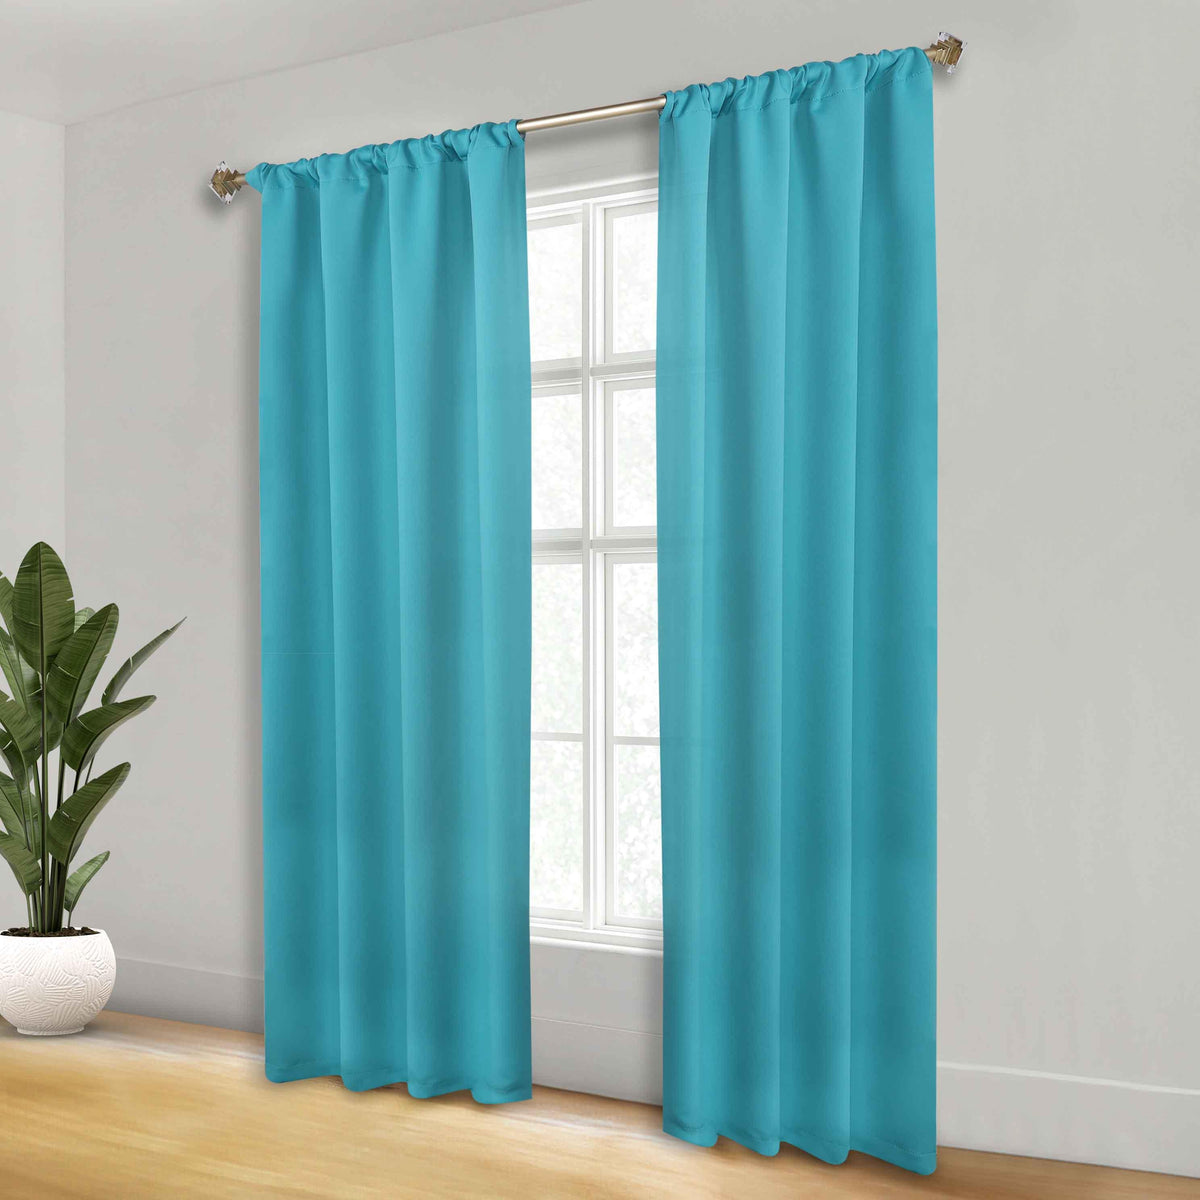 Solid Room Darkening Blackout Curtain Panels, Rod Pocket, Set of 2 - Blackout Curtains by Superior - Superior 